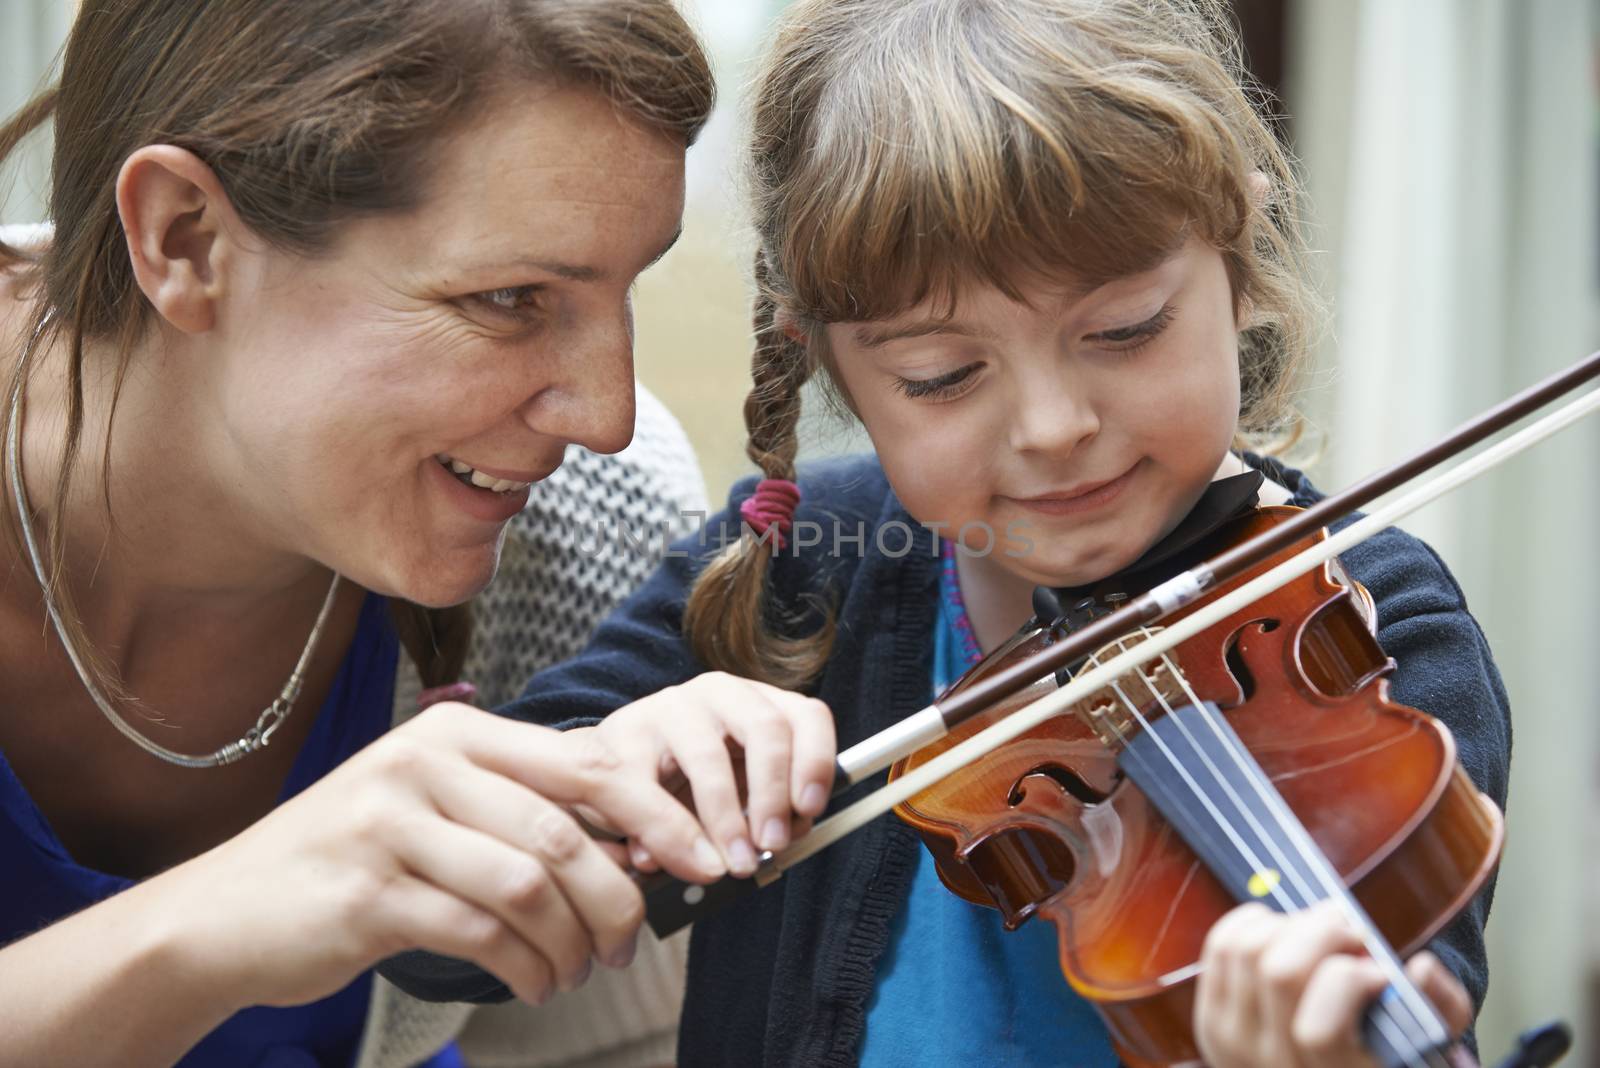 Teacher Helping Young Female Pupil In Violin Lesson by HWS